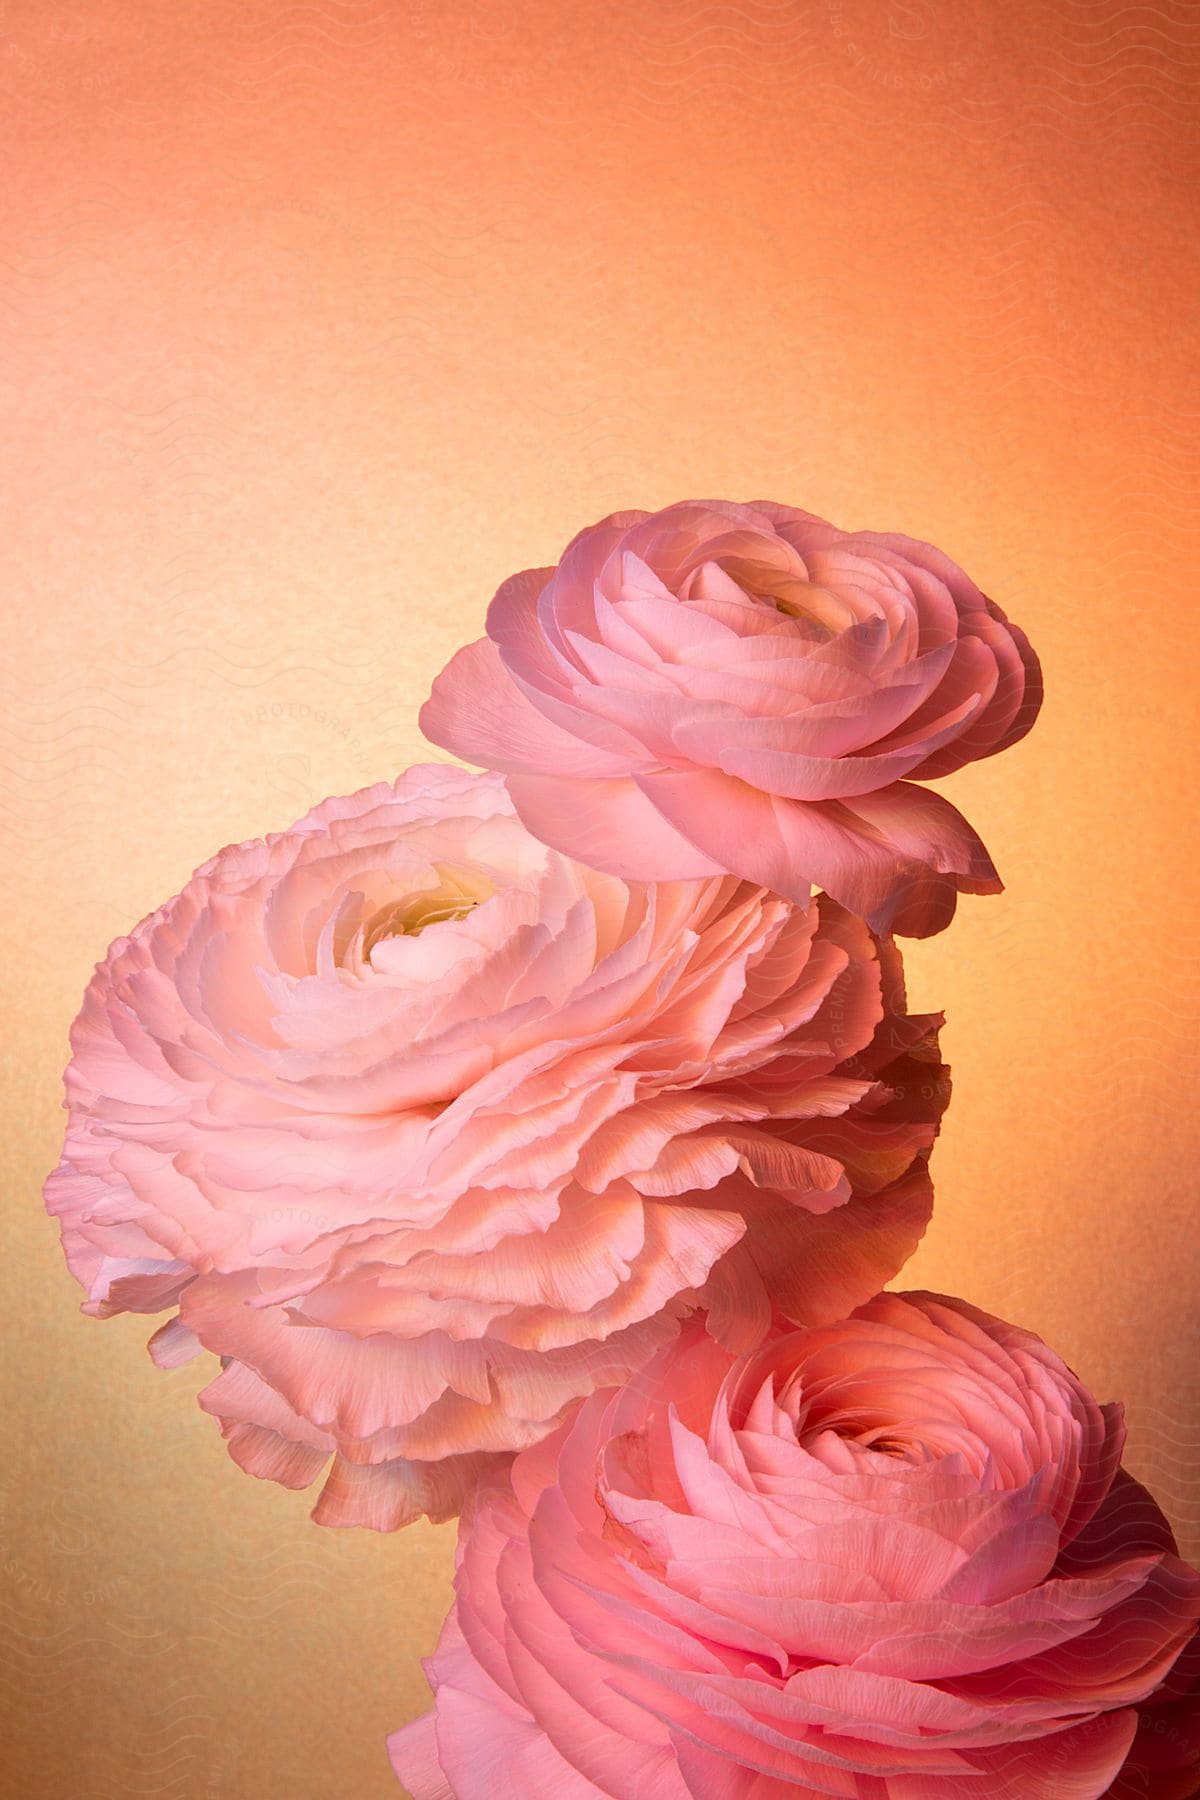 Closeup on pink flowers of different sizes on an orange background